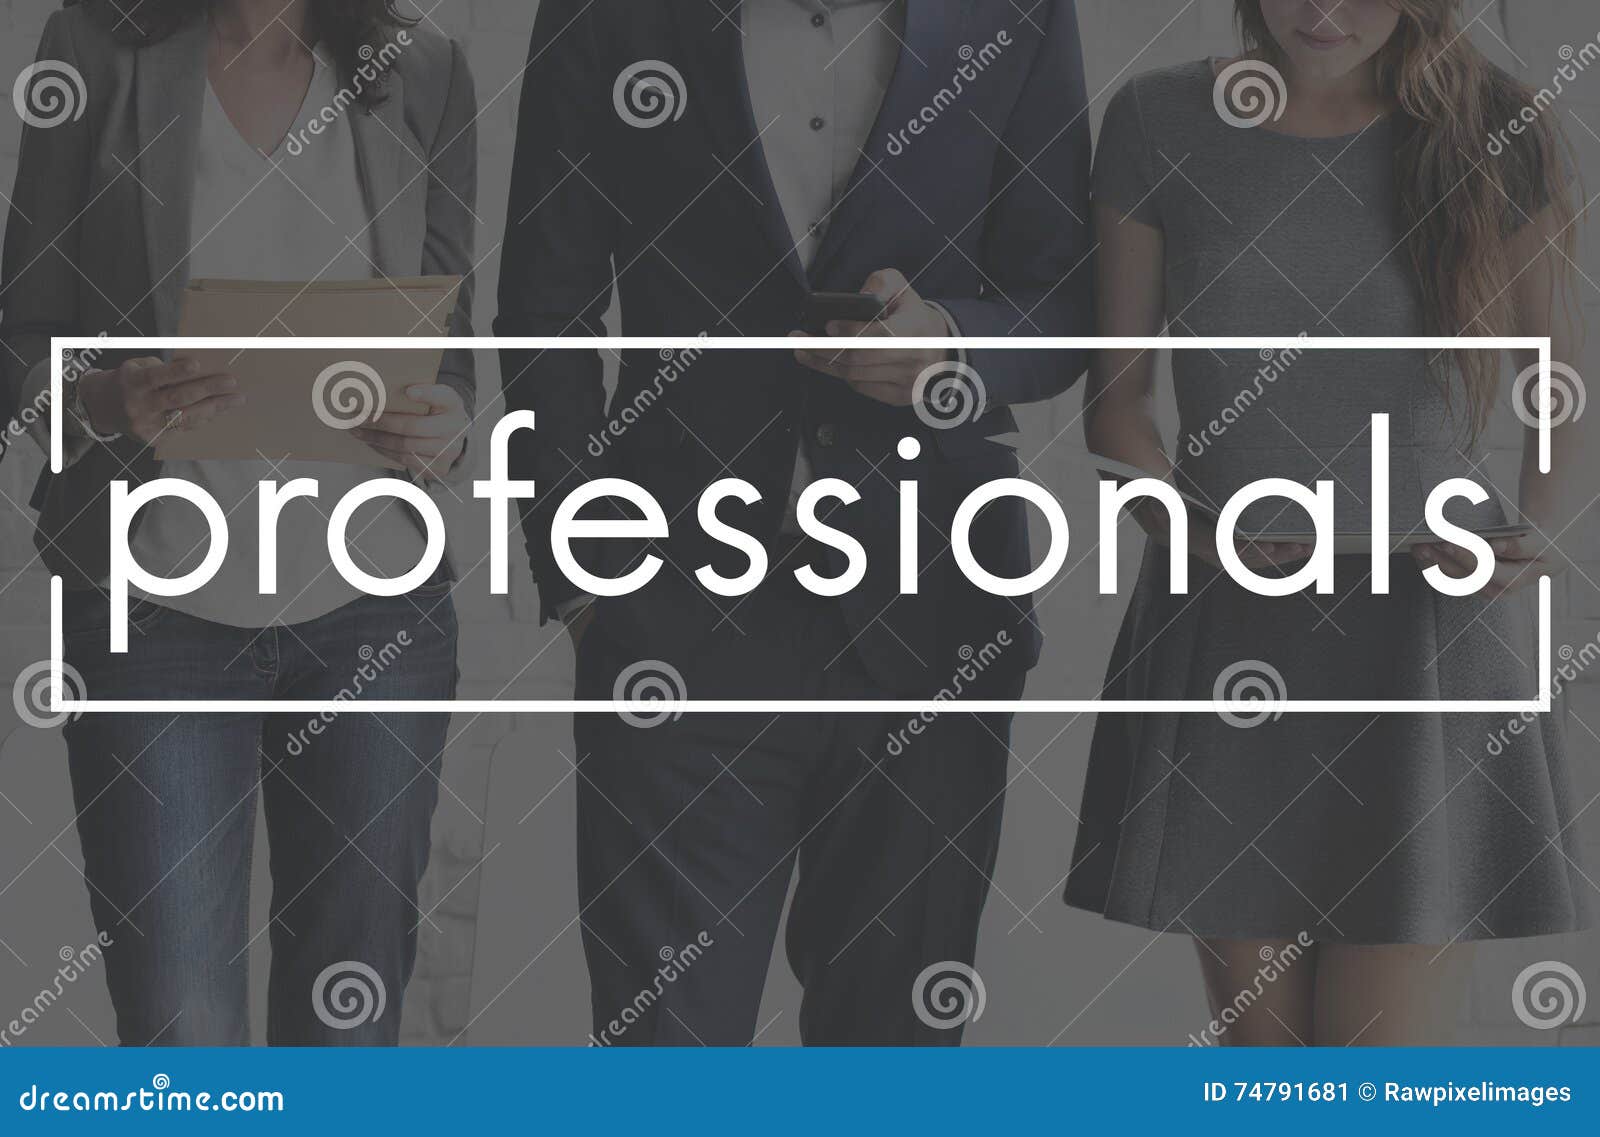 professionals business people expert accomplished concept